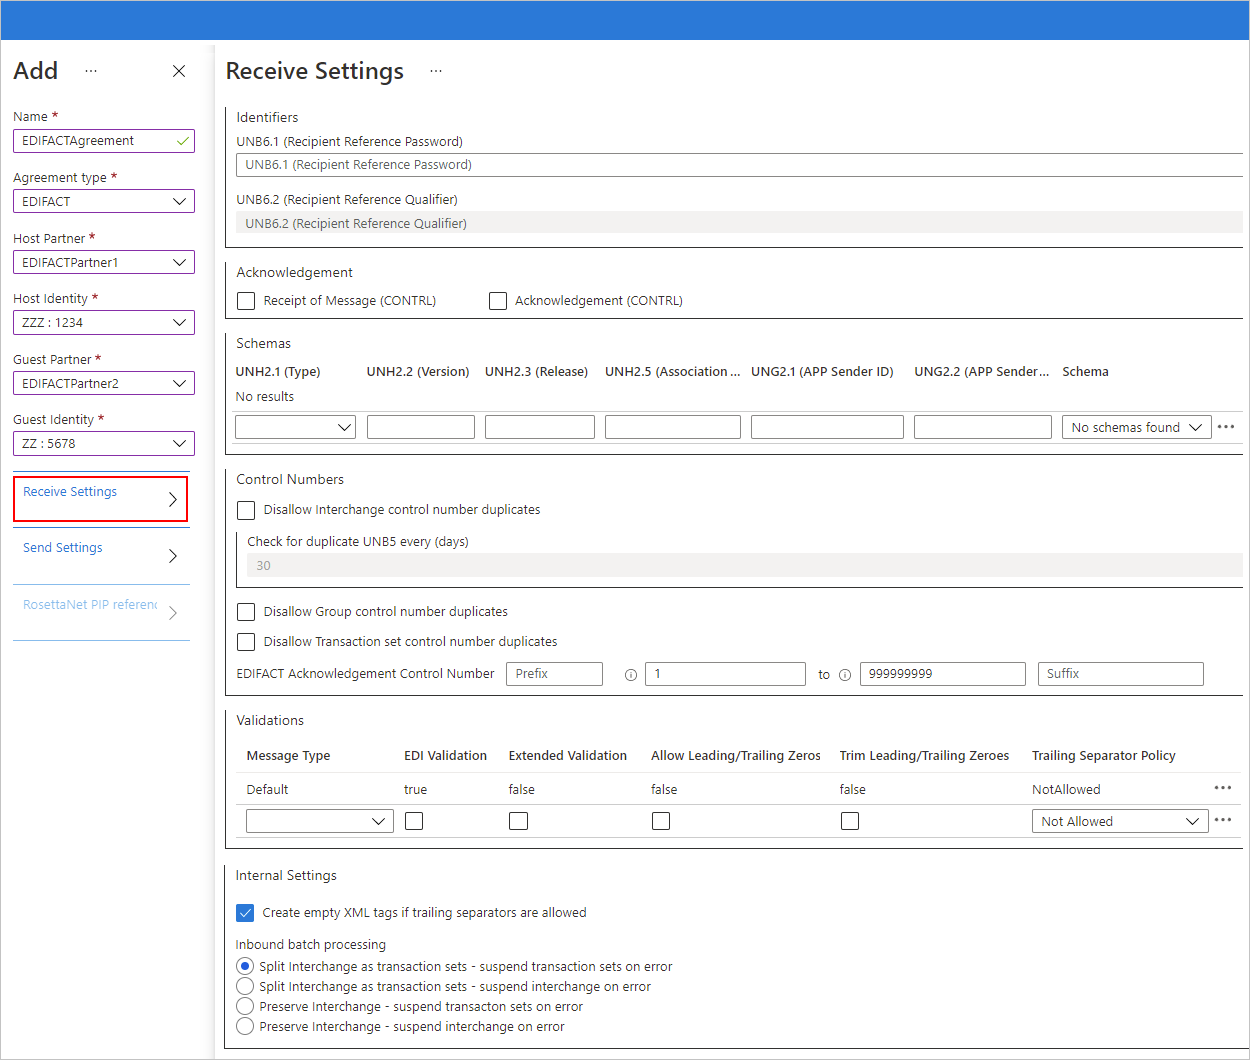 Screenshot showing Azure portal and EDIFACT agreement settings for inbound messages.